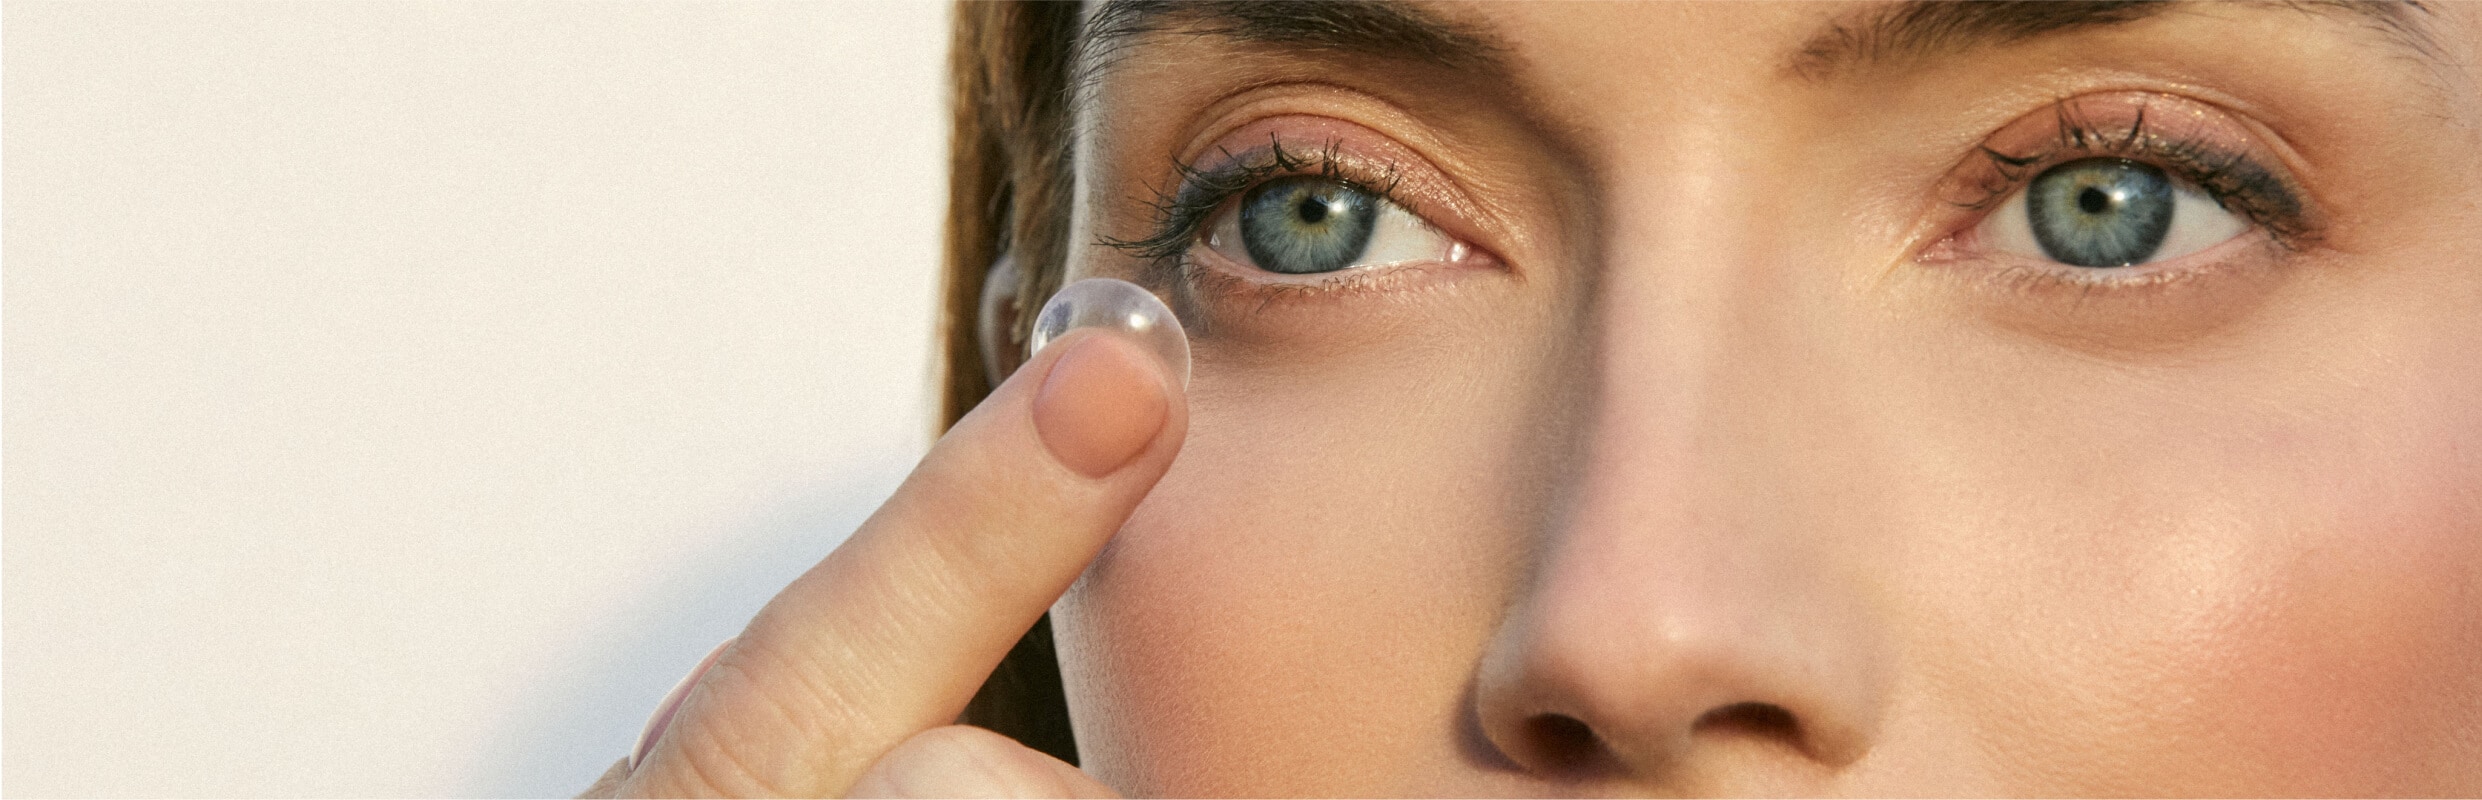 Contact lenses information hero image